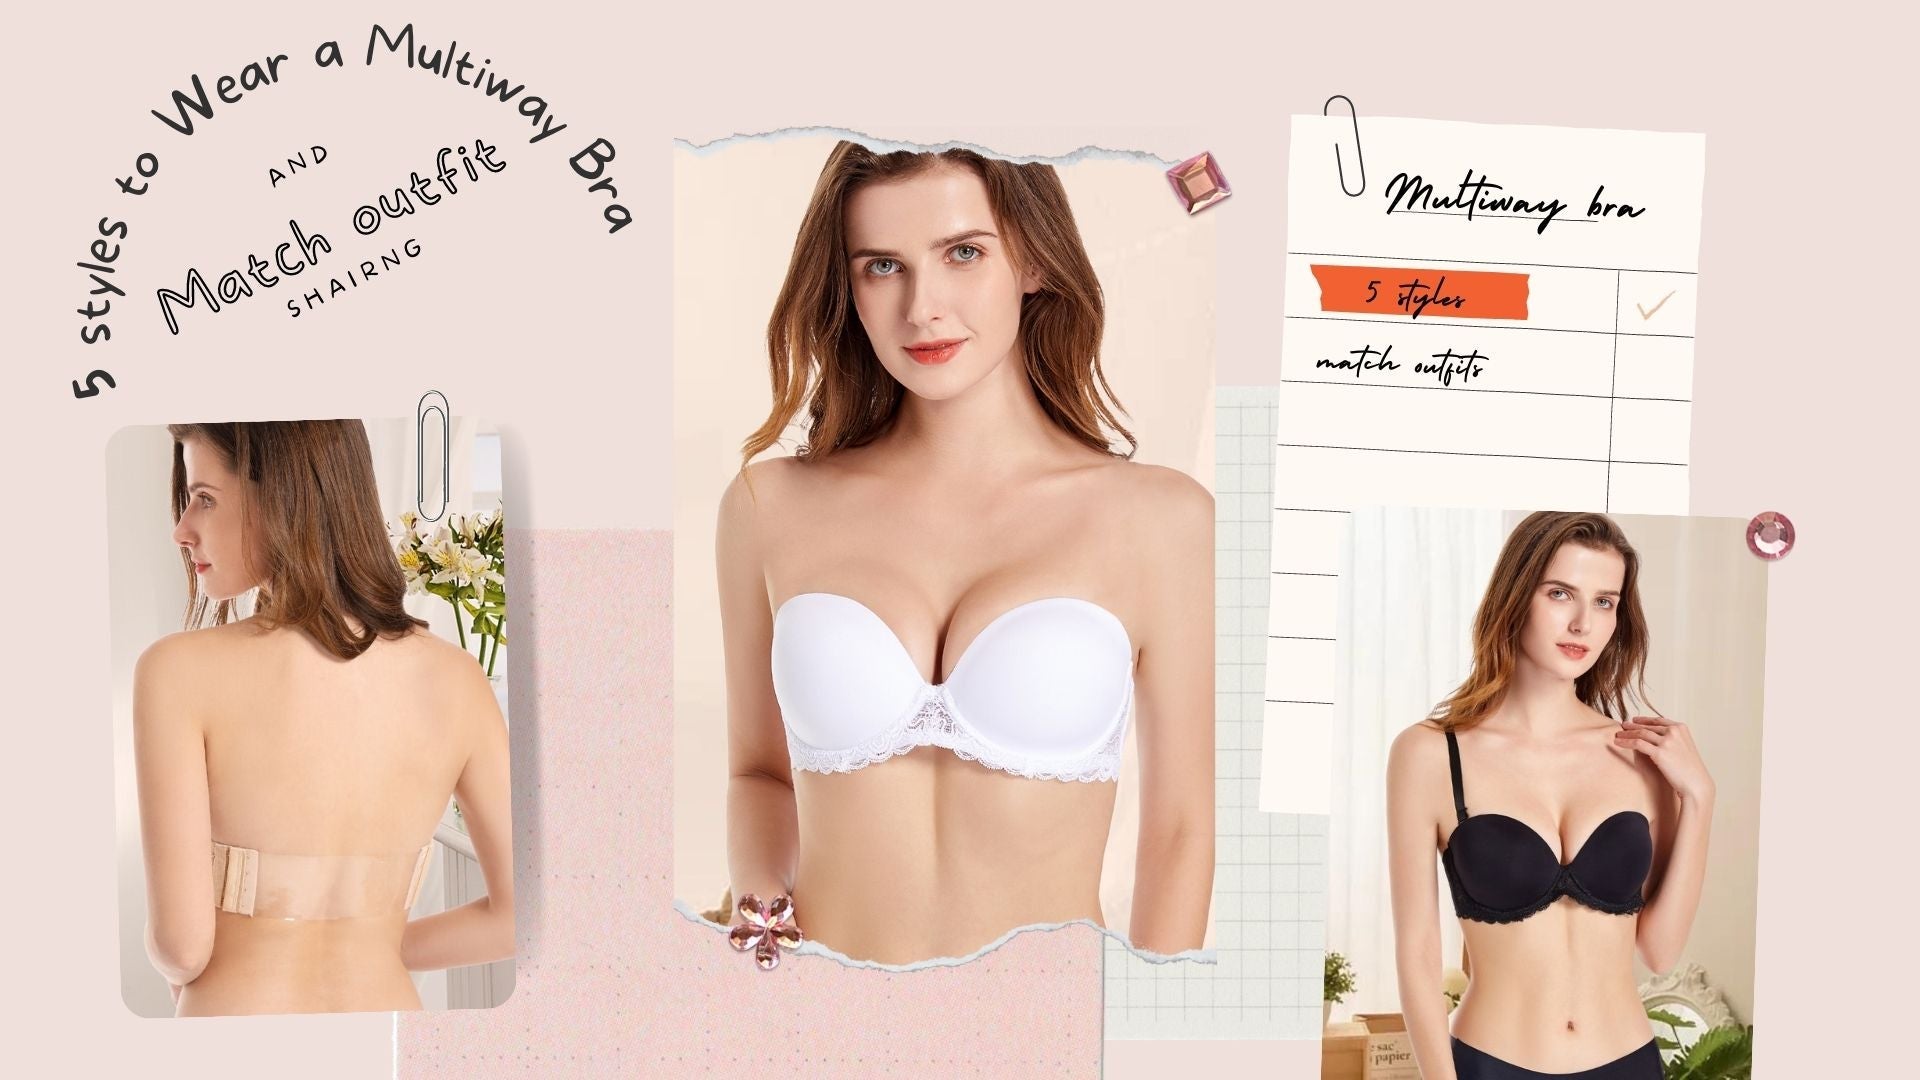 5 Styles to Wear a Multiway Bra and Match Outfits